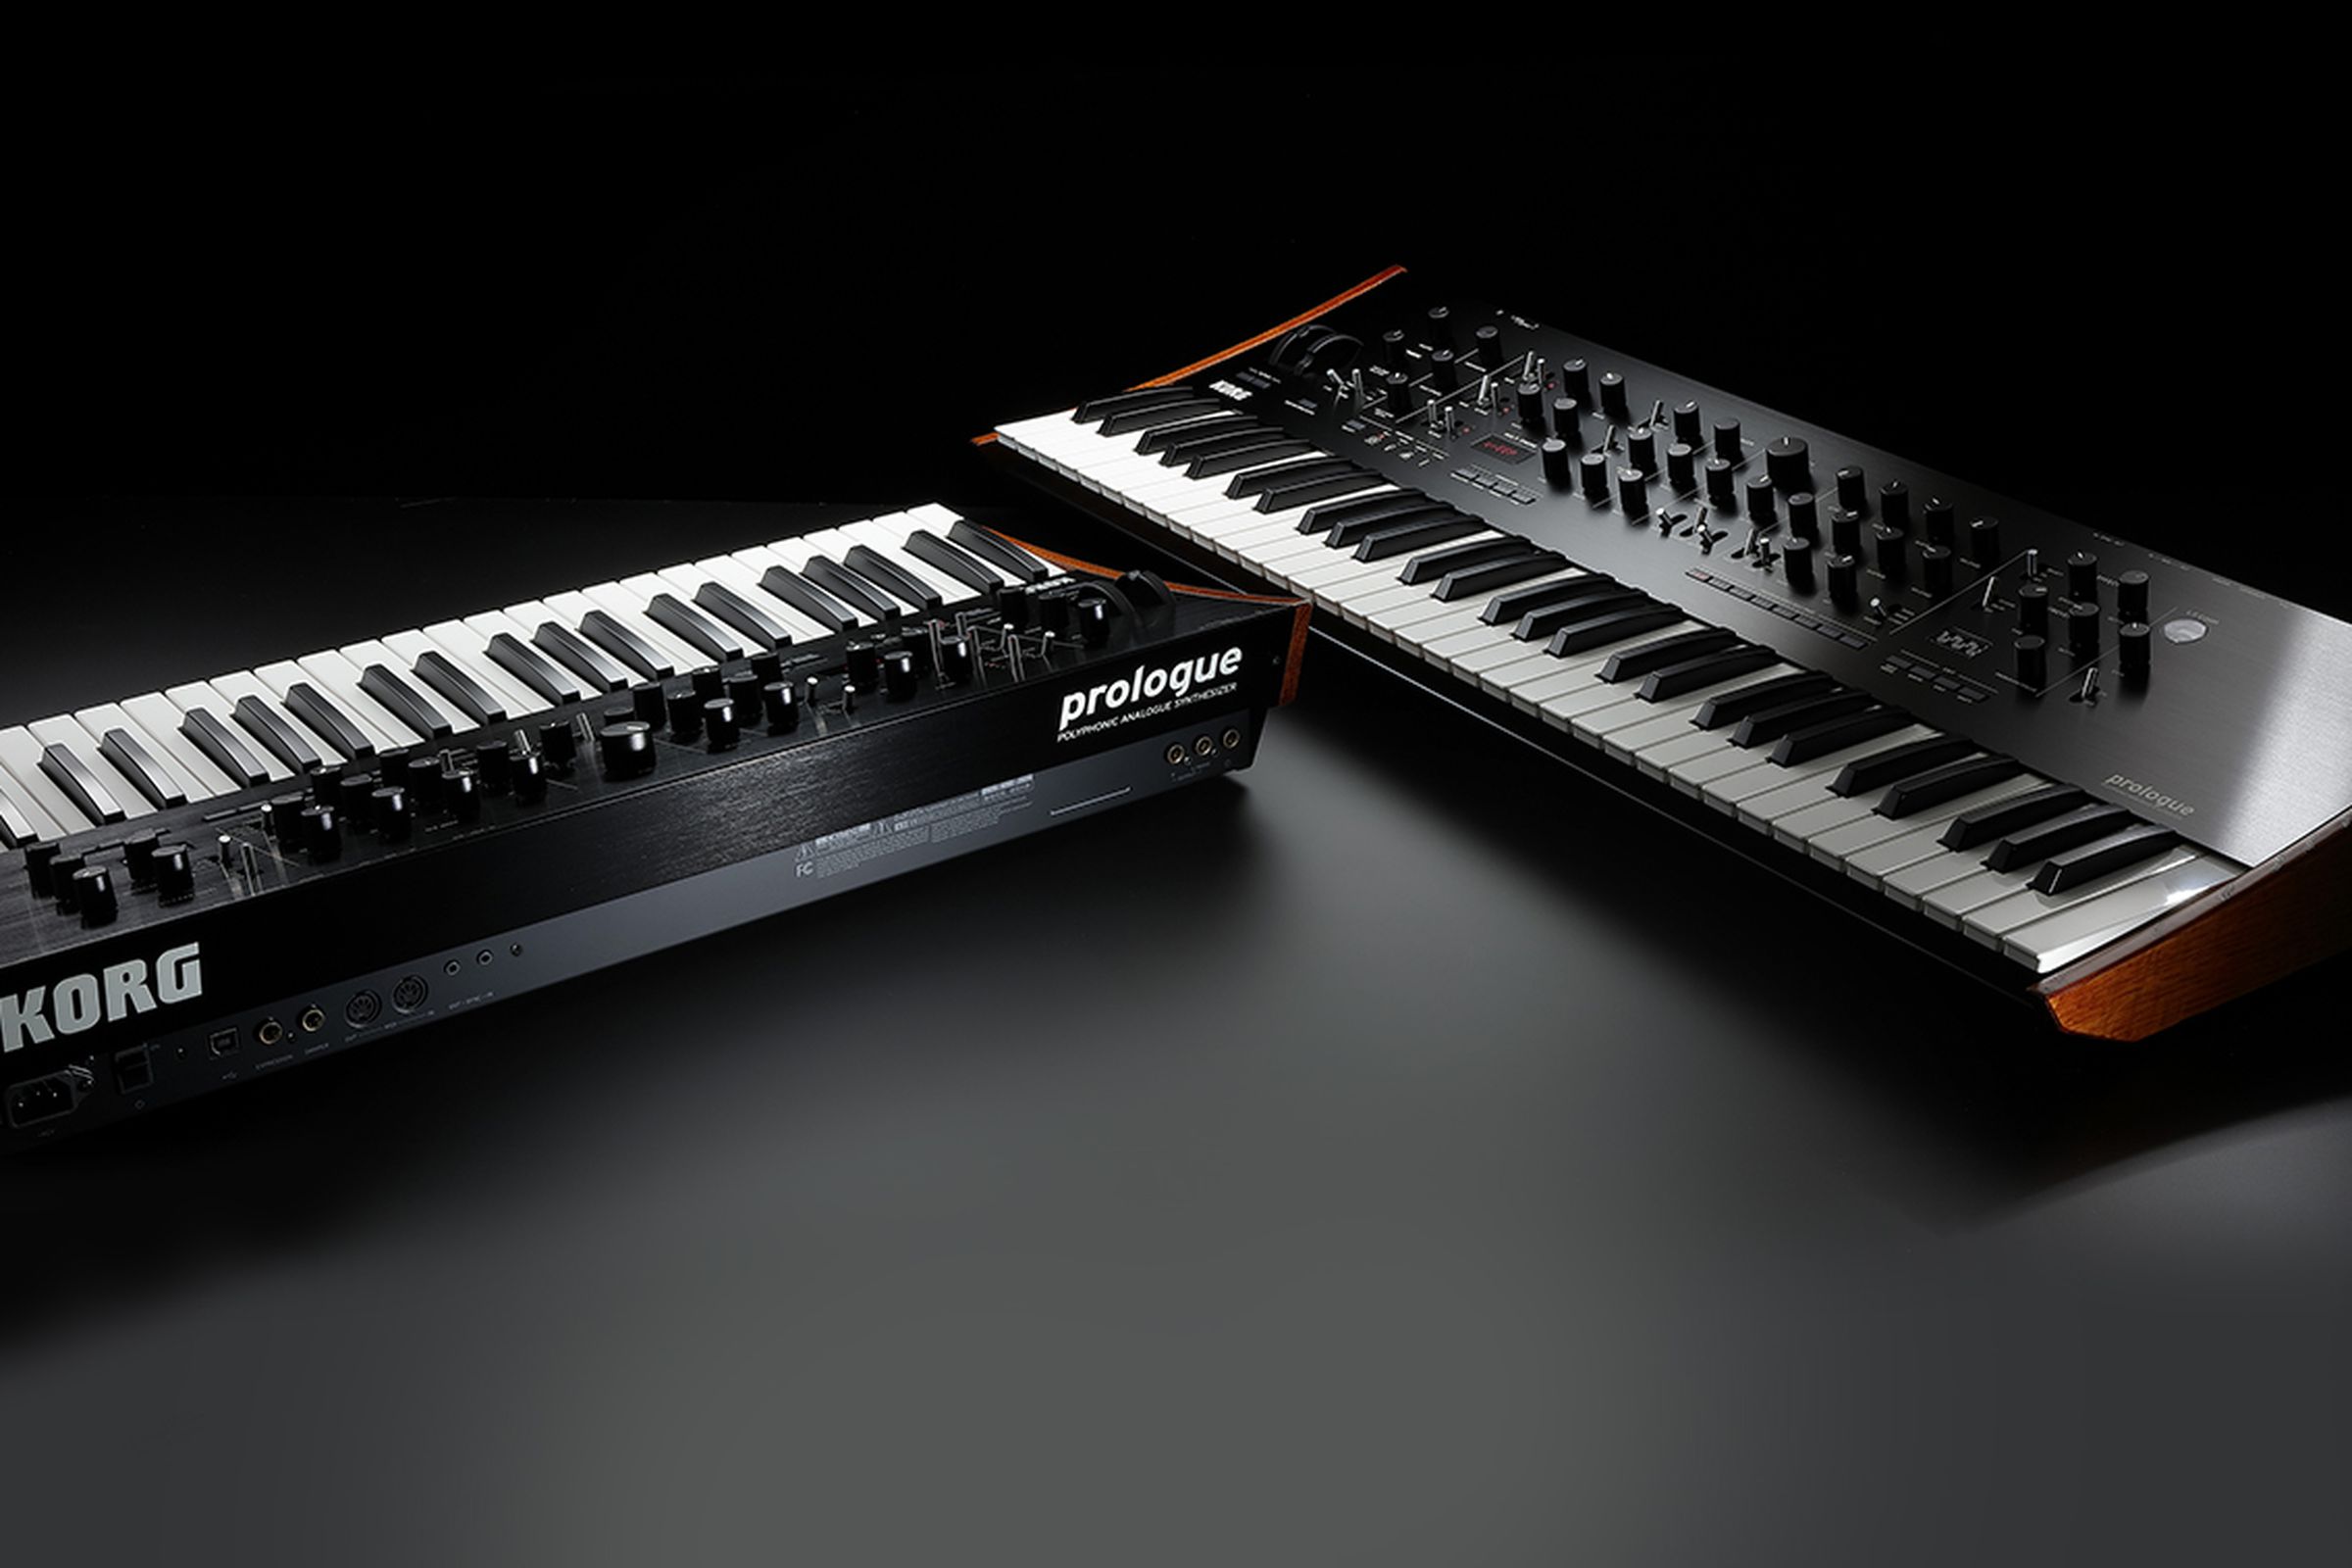 Korg Prologue synth